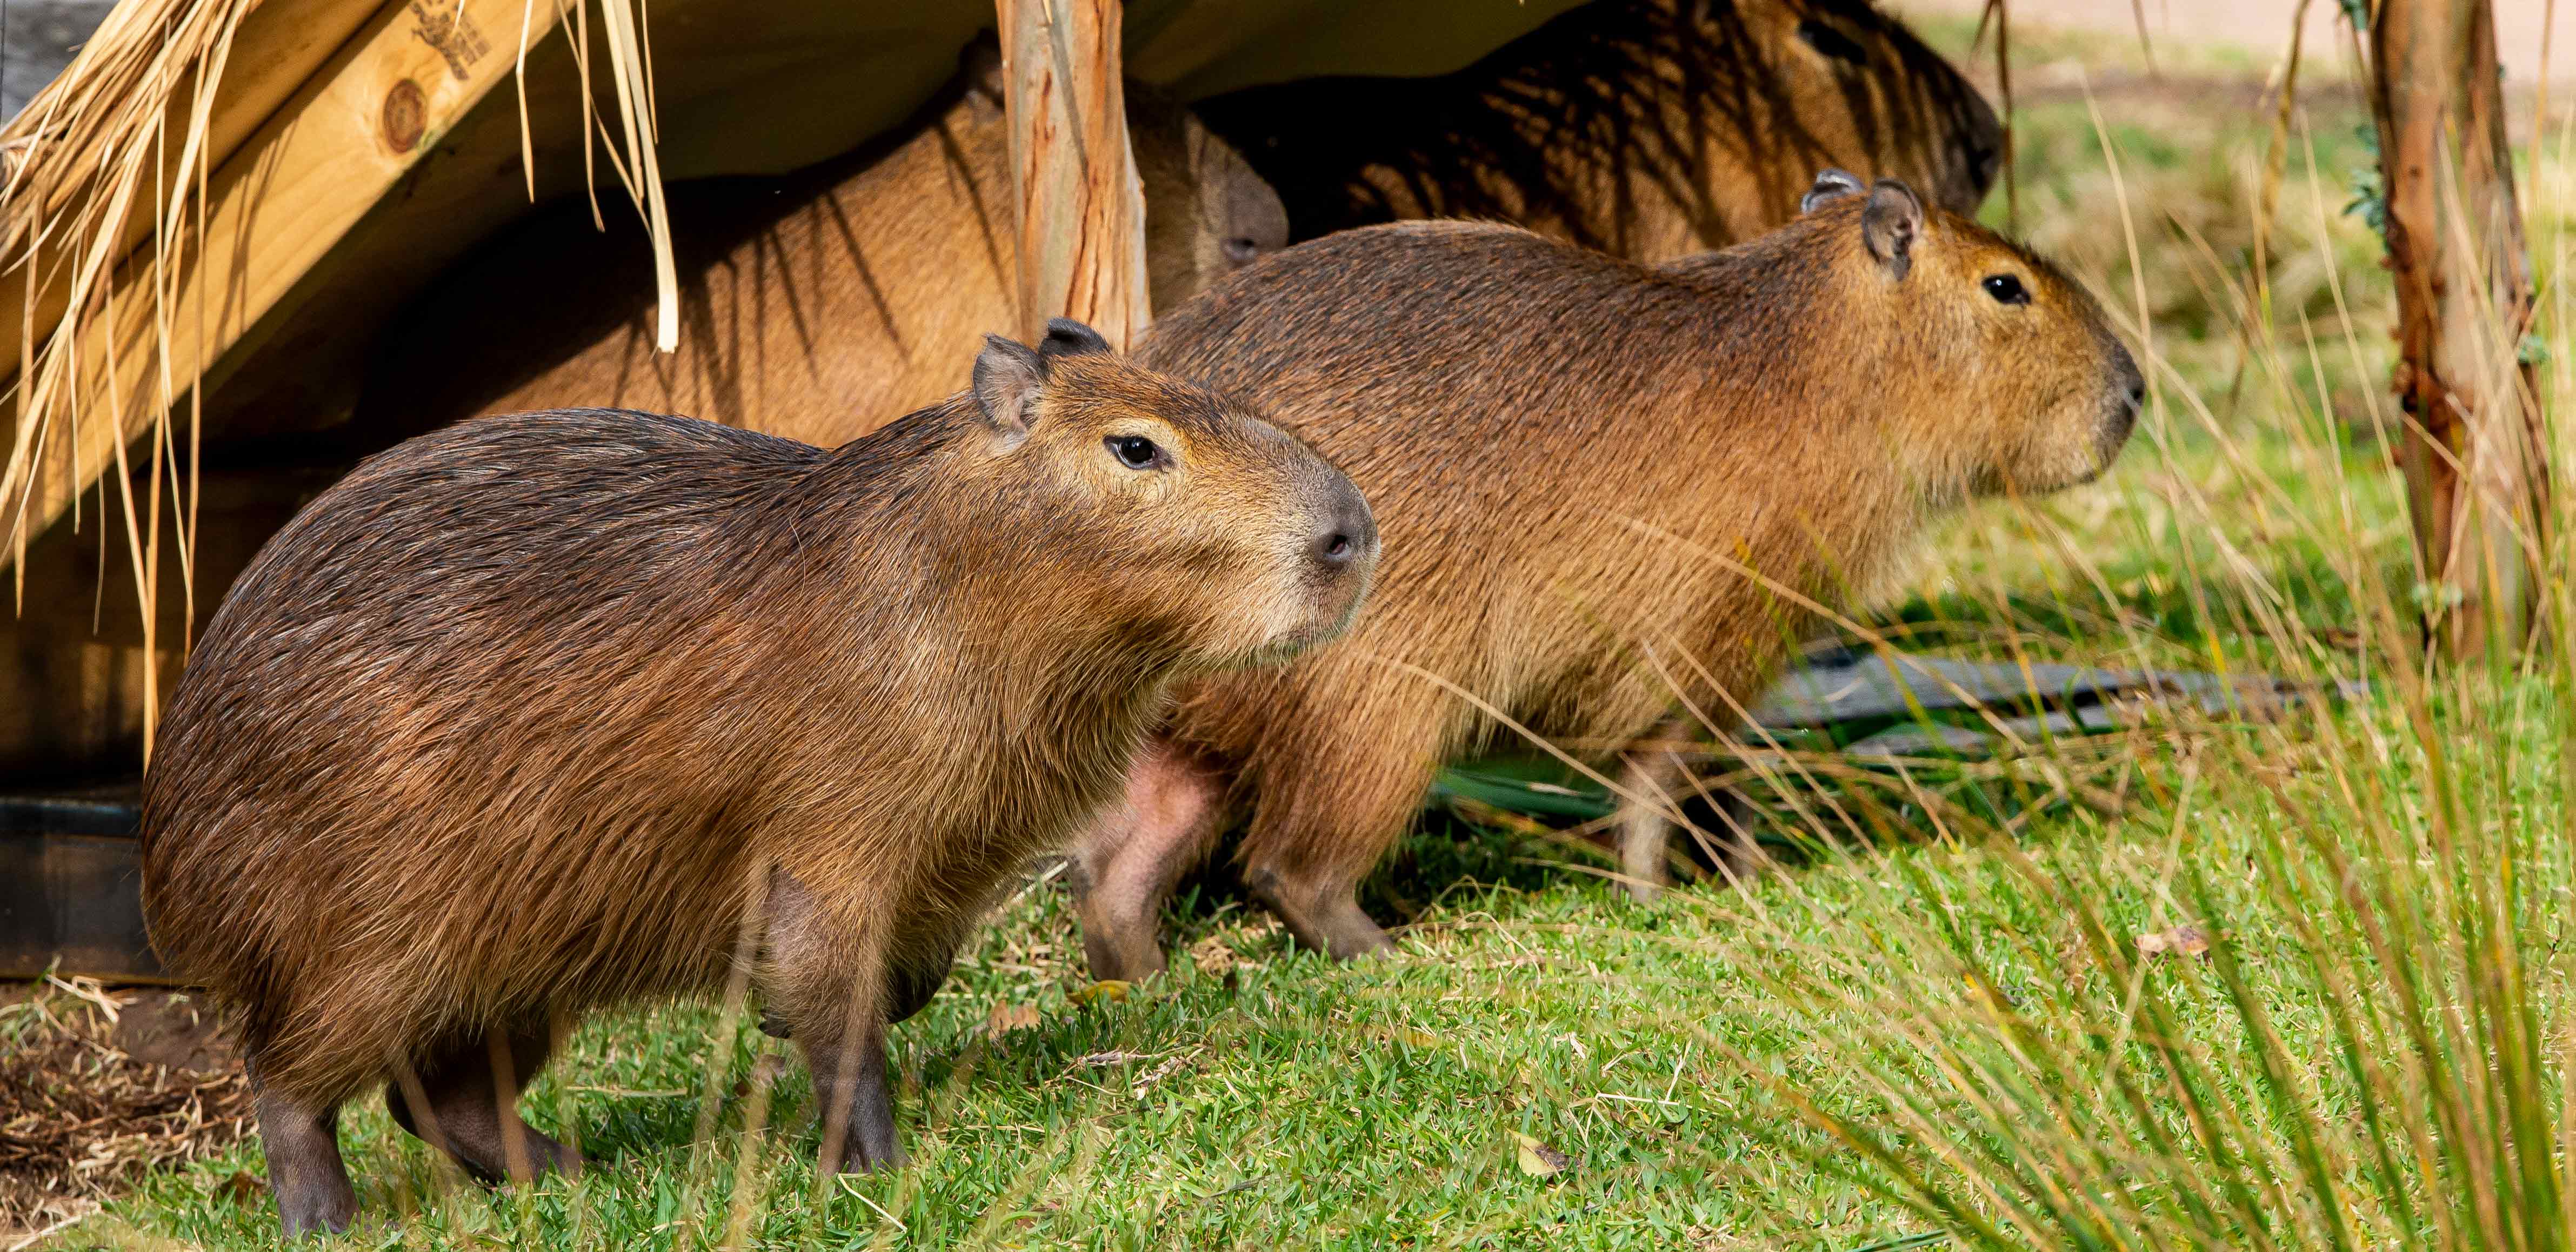 World's largest rodent finds new home at Taronga Zoo | Taronga Conservation  Society Australia